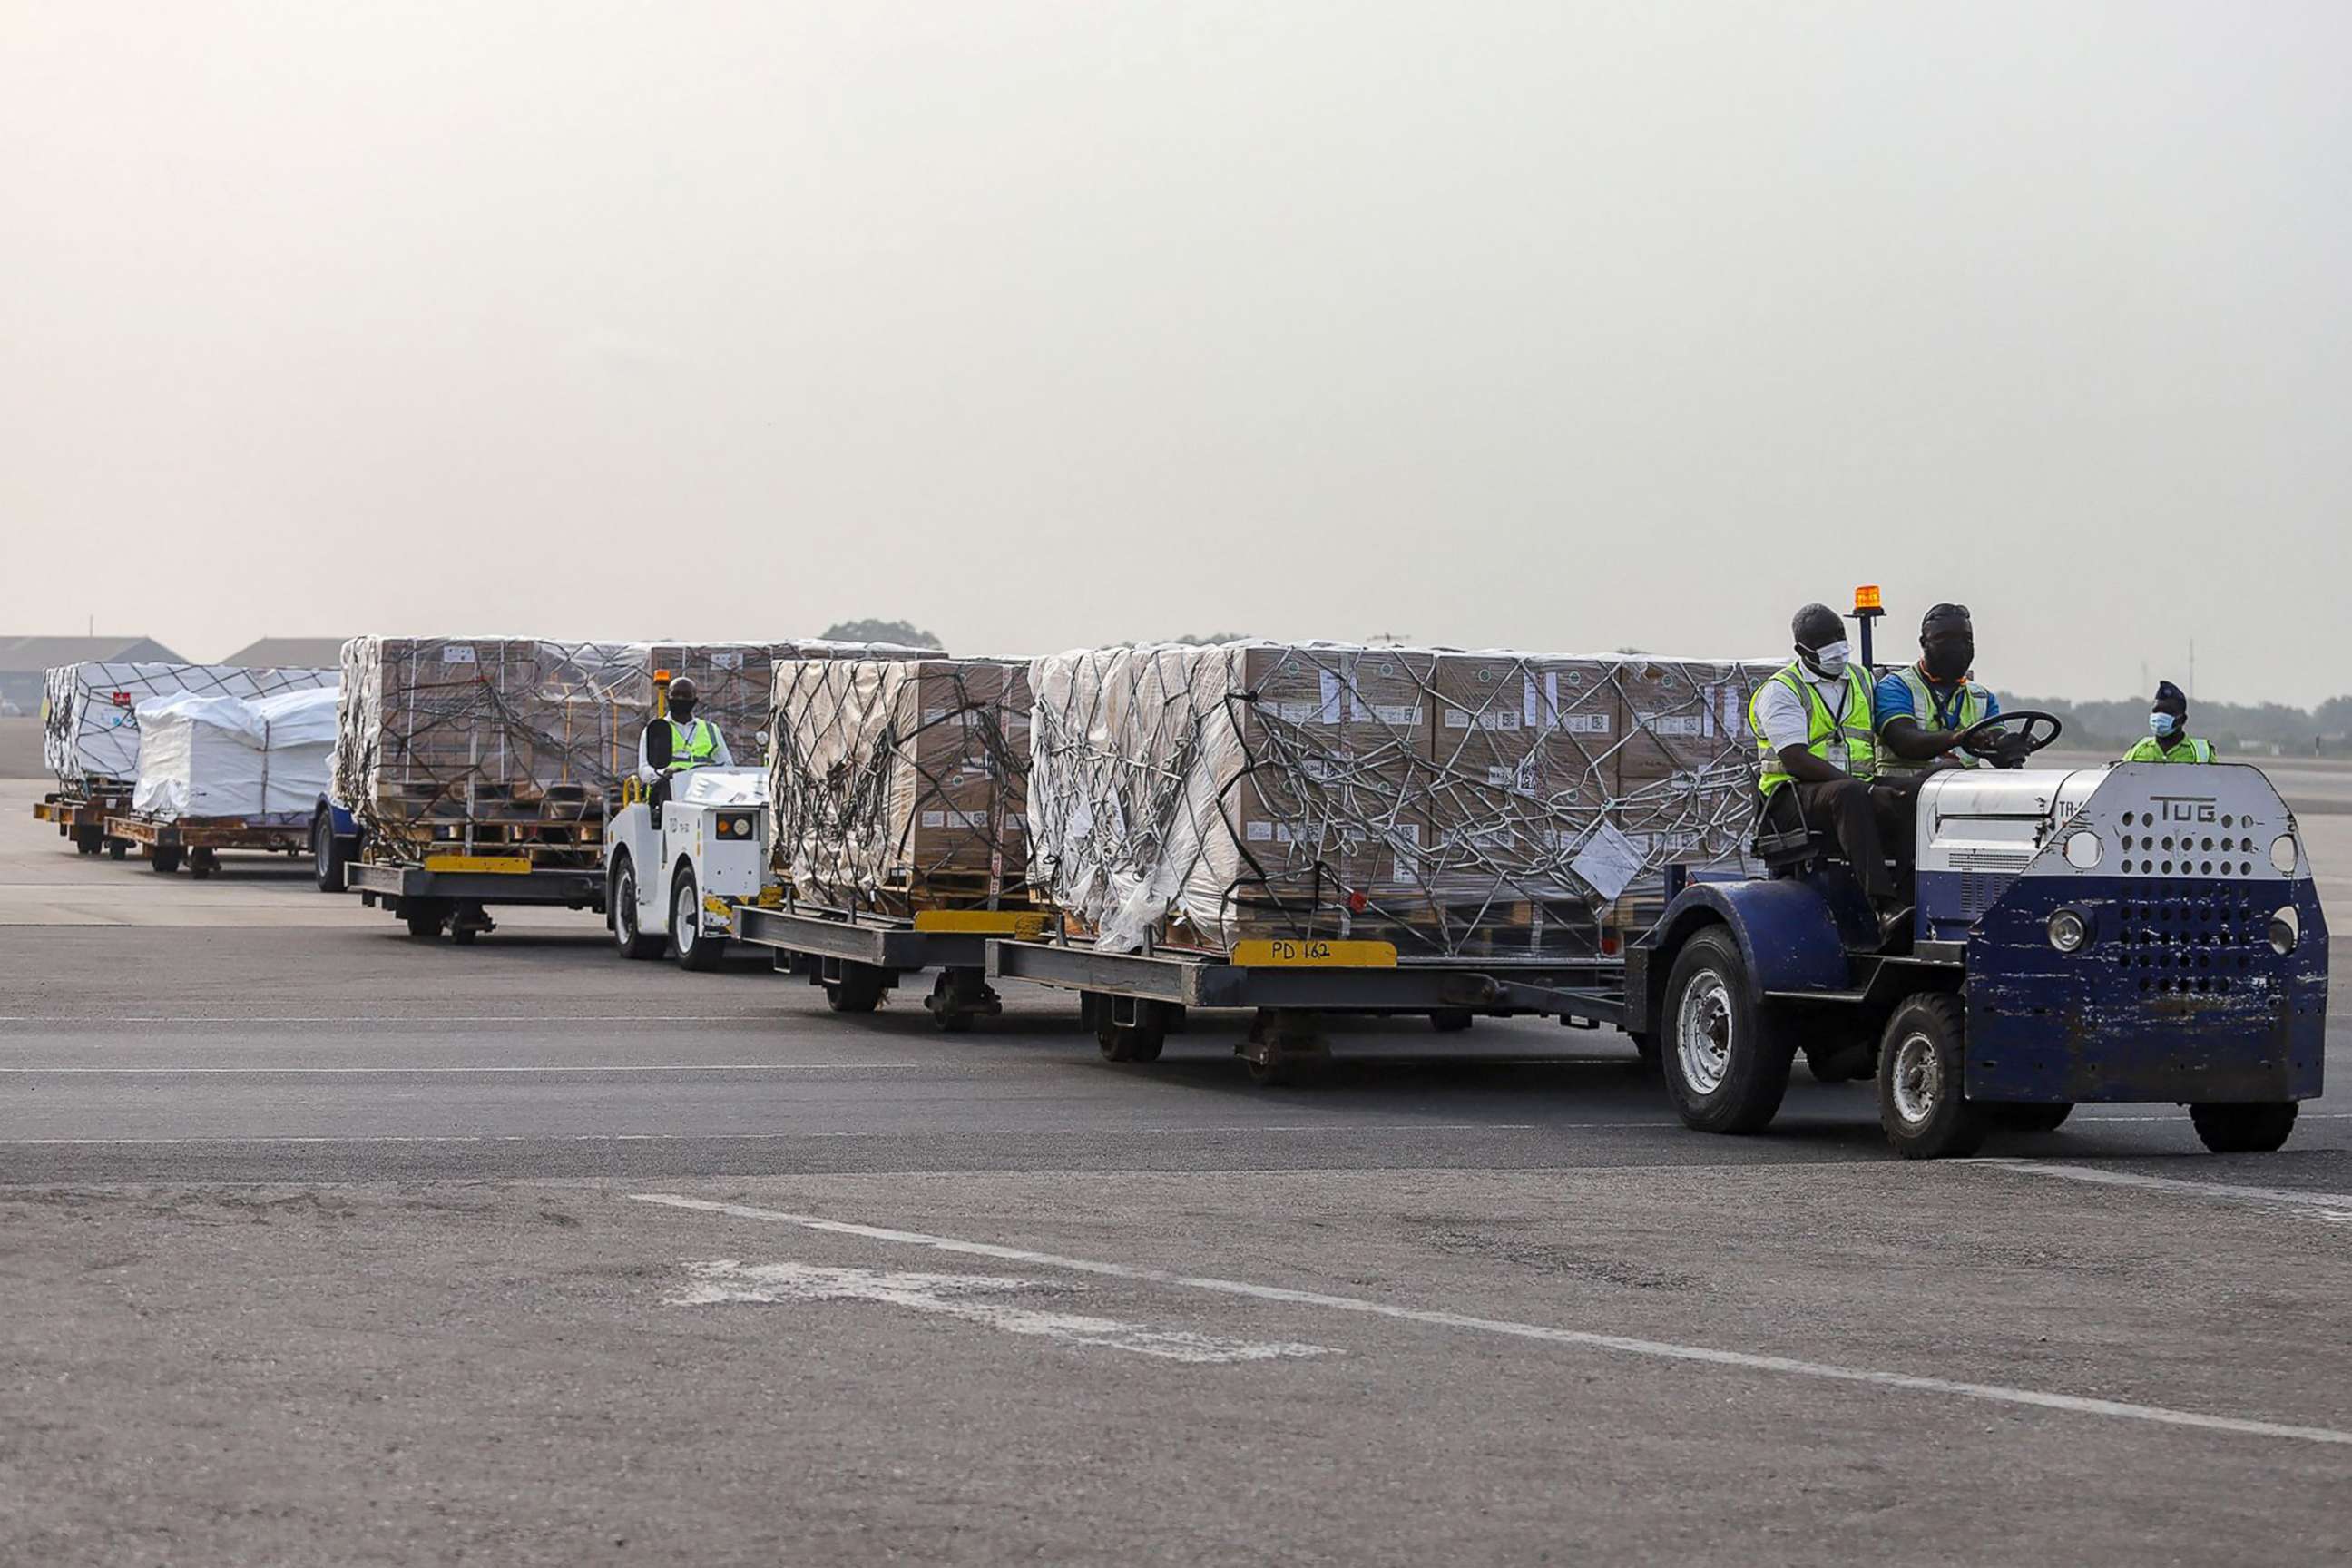 PHOTO: Airport workers transport a shipment of Covid-19 vaccines from the COVAX global  vaccination program, at the Kotoka International Airport in Accra, Ghana, Feb. 24, 2021.